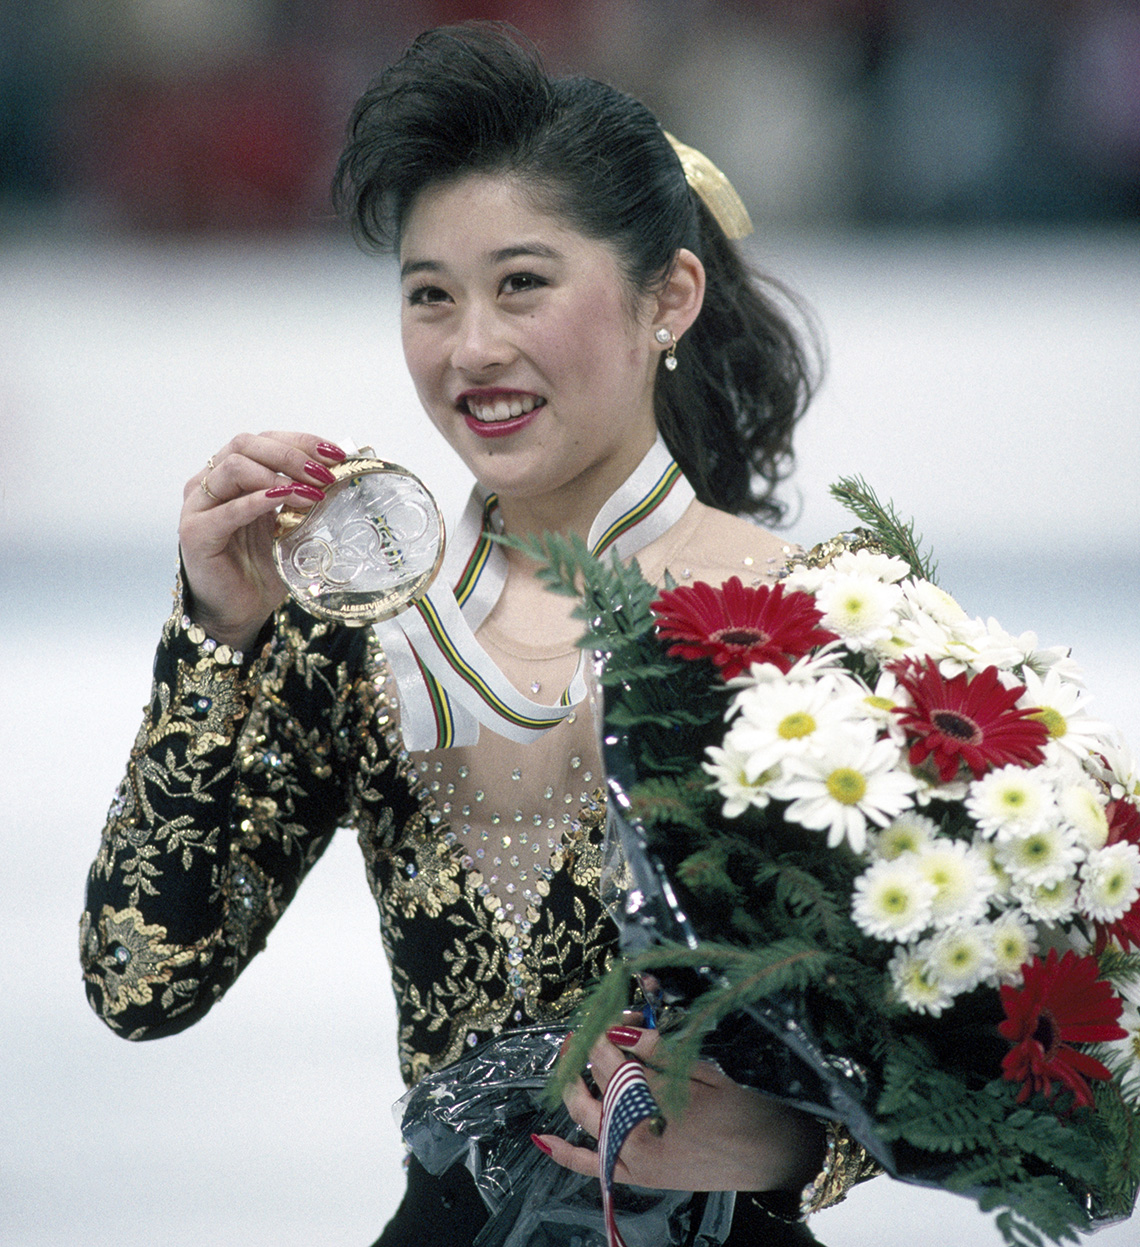 Kristi Yamaguchi holds up her gold medal after her performance in the ladies skating event during the 1992 Winter Olympic Games in Albertville France